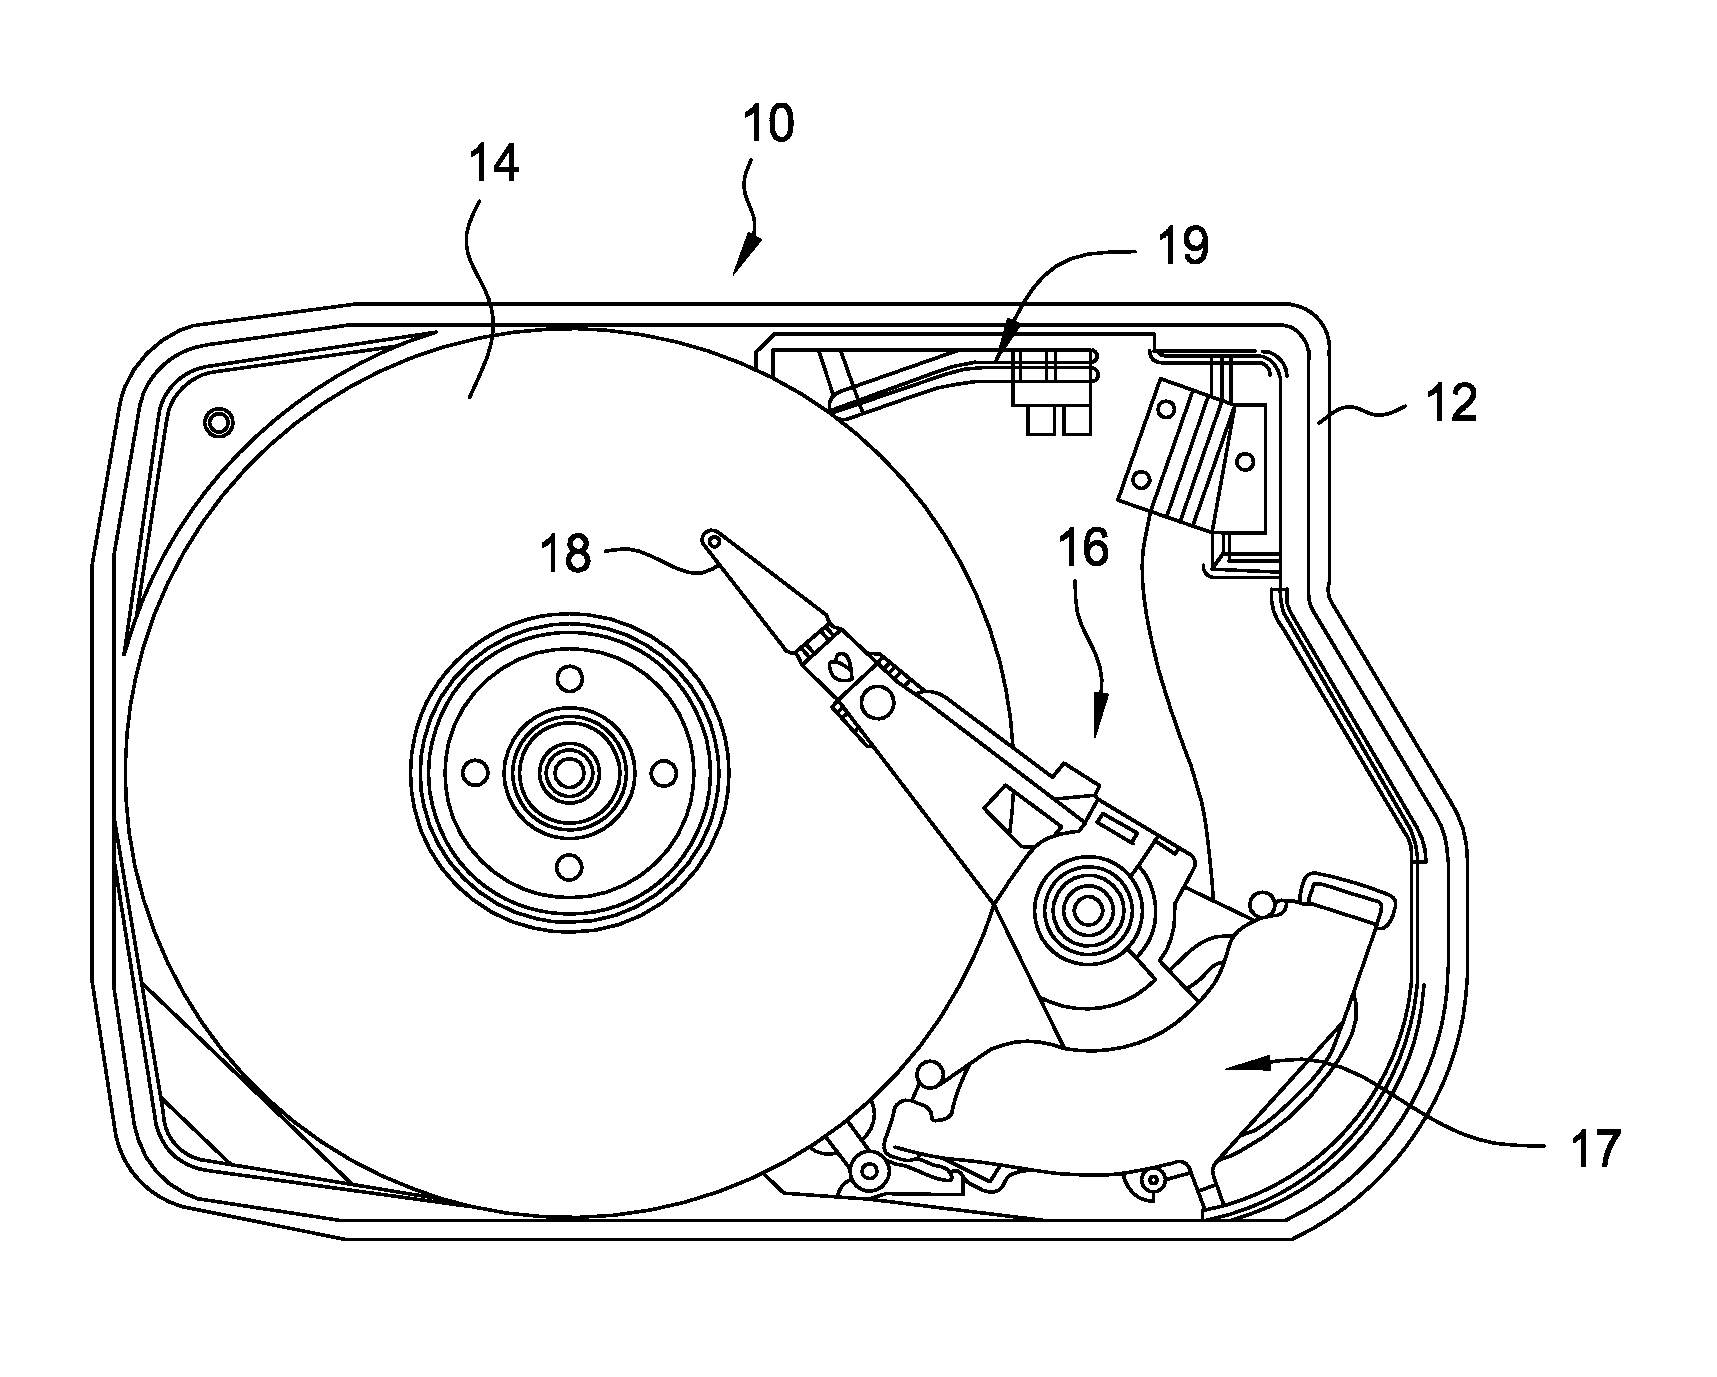 Abs with lubricant control trenches for hard disk drives